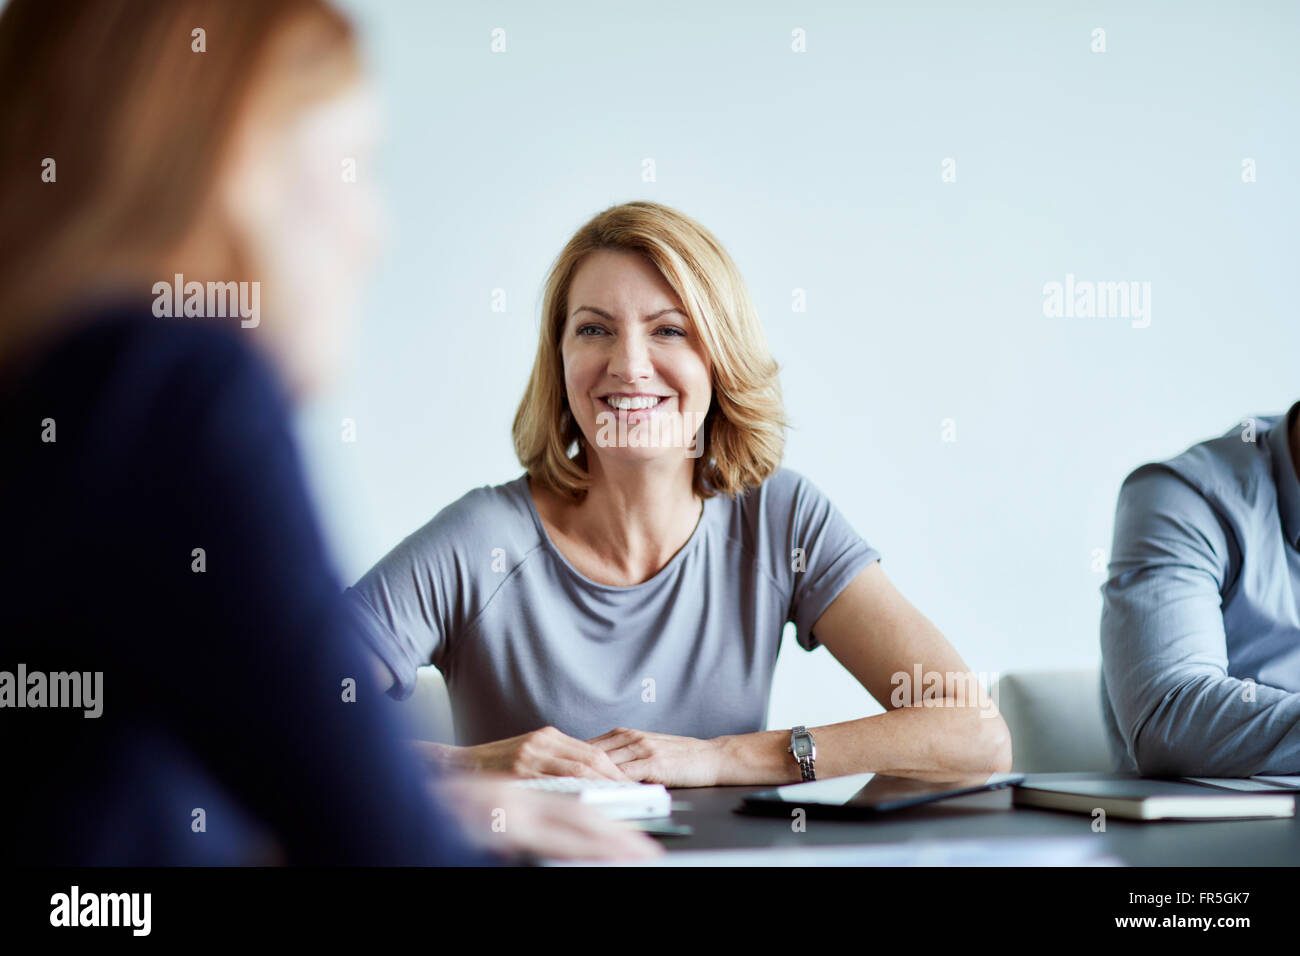 Confident businesswoman in meeting Banque D'Images